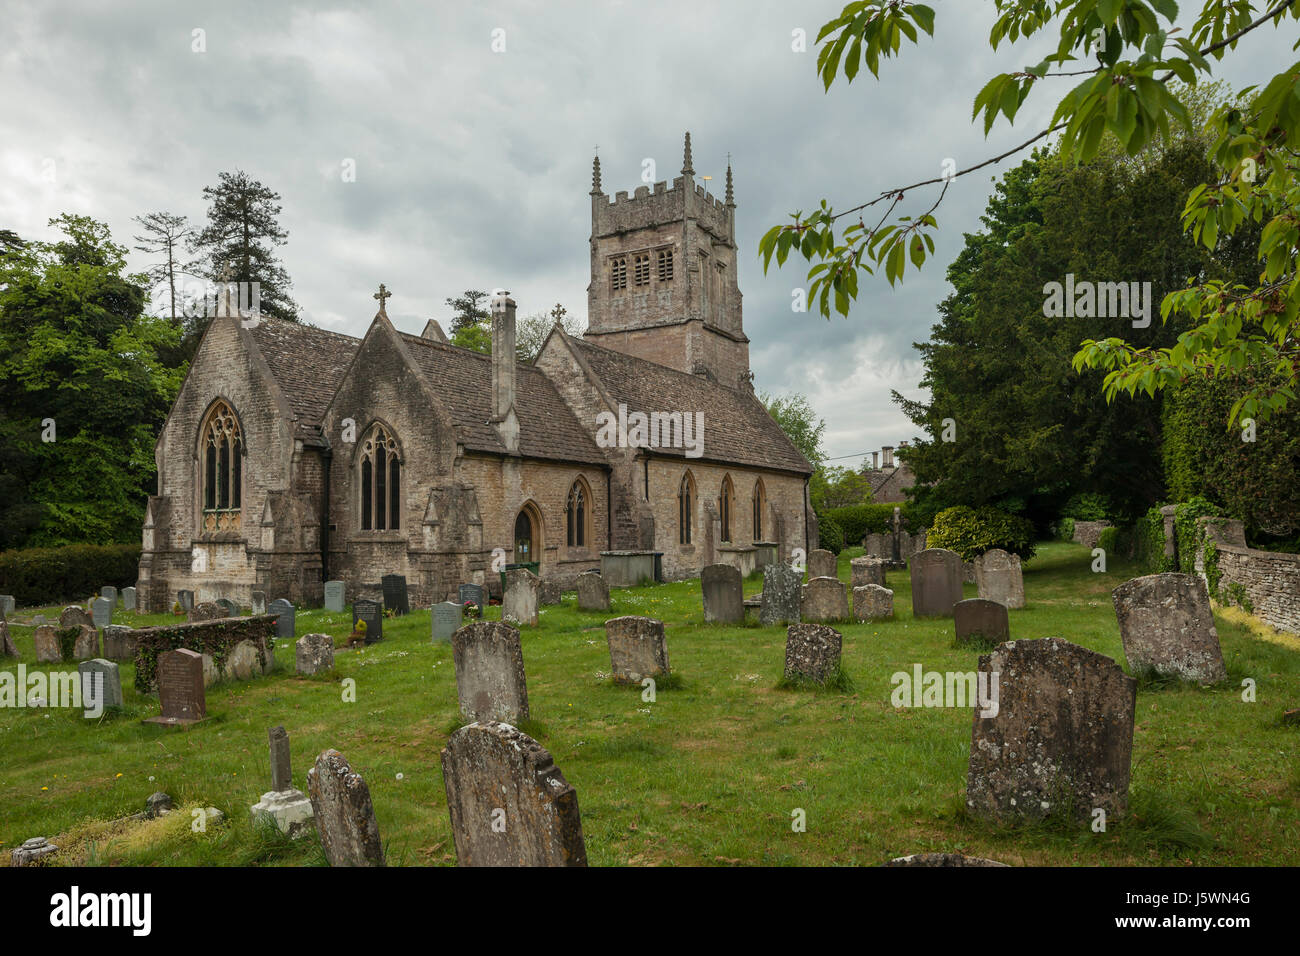 St Mary's church in the Cotswold village of Grittleton, Witshire, England. Stock Photo